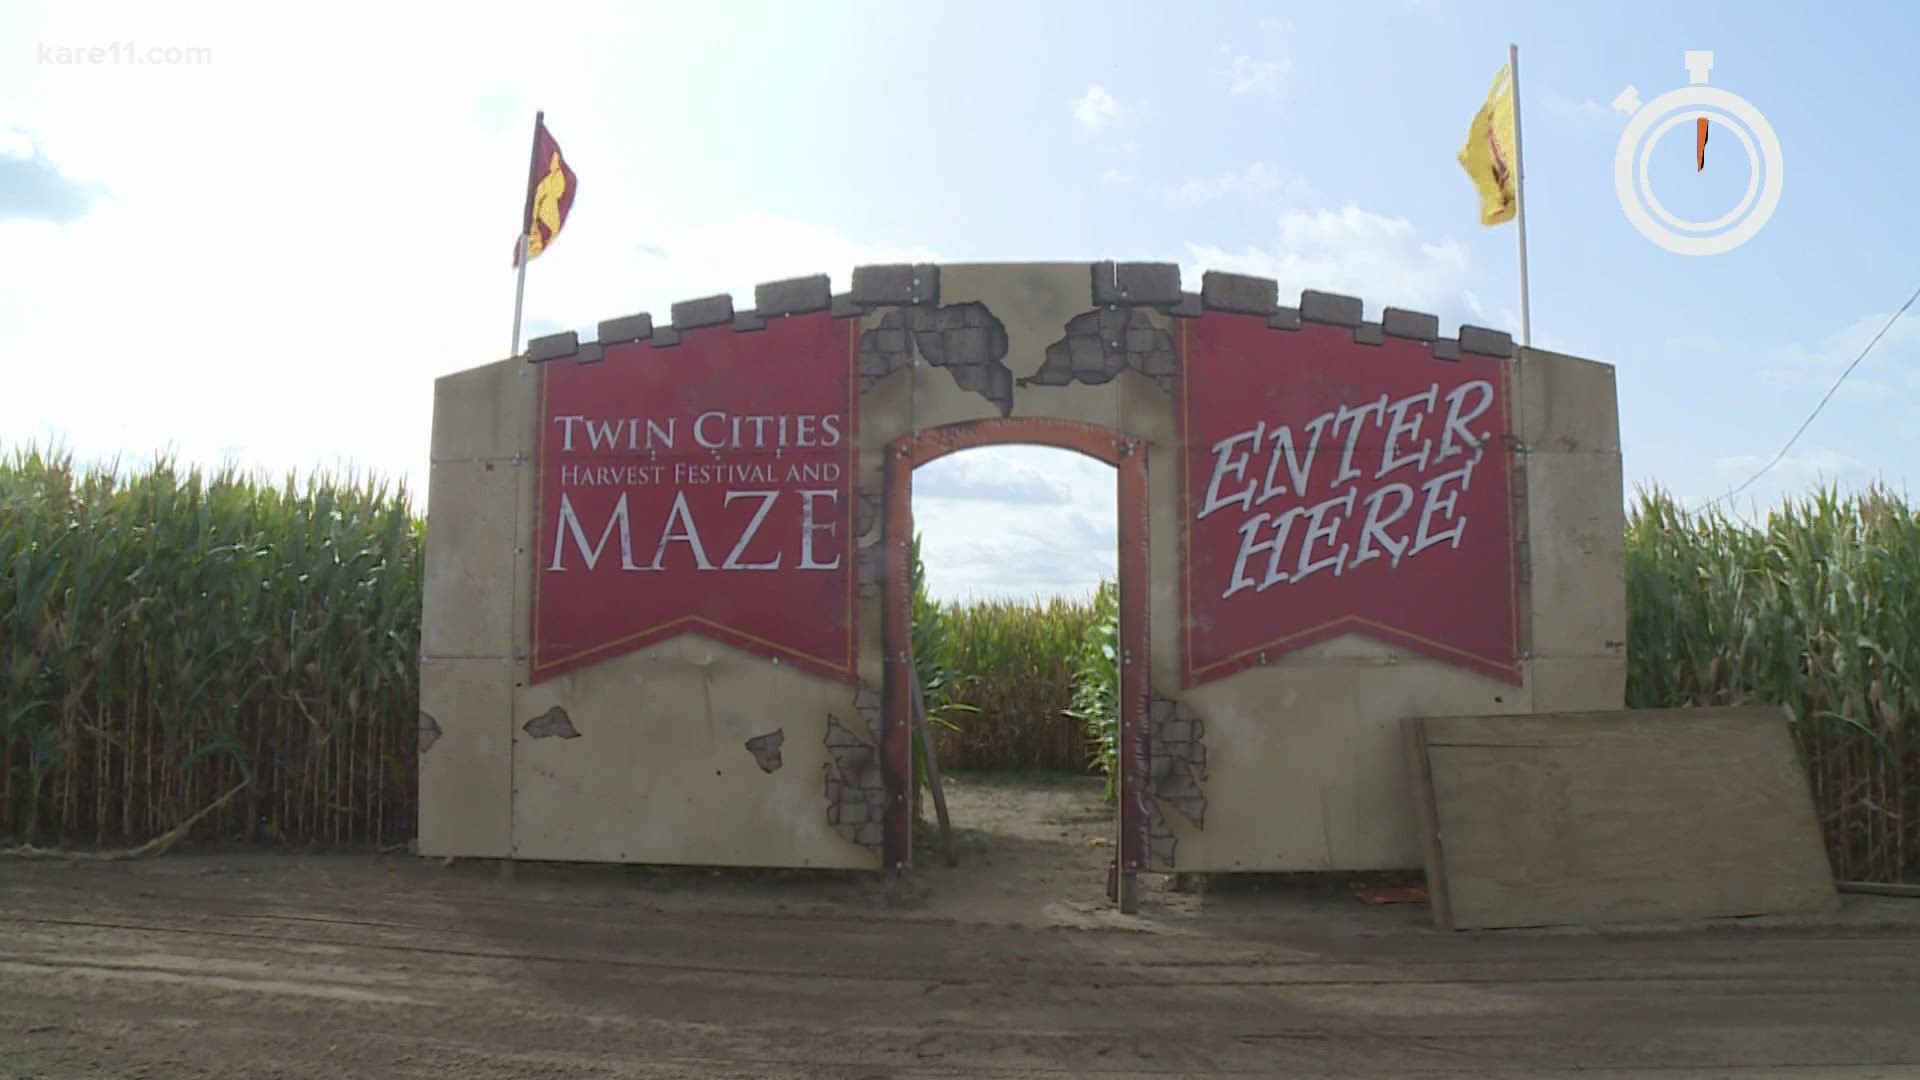 The largest corn maze in Minnesota is open for exploration this weekend!